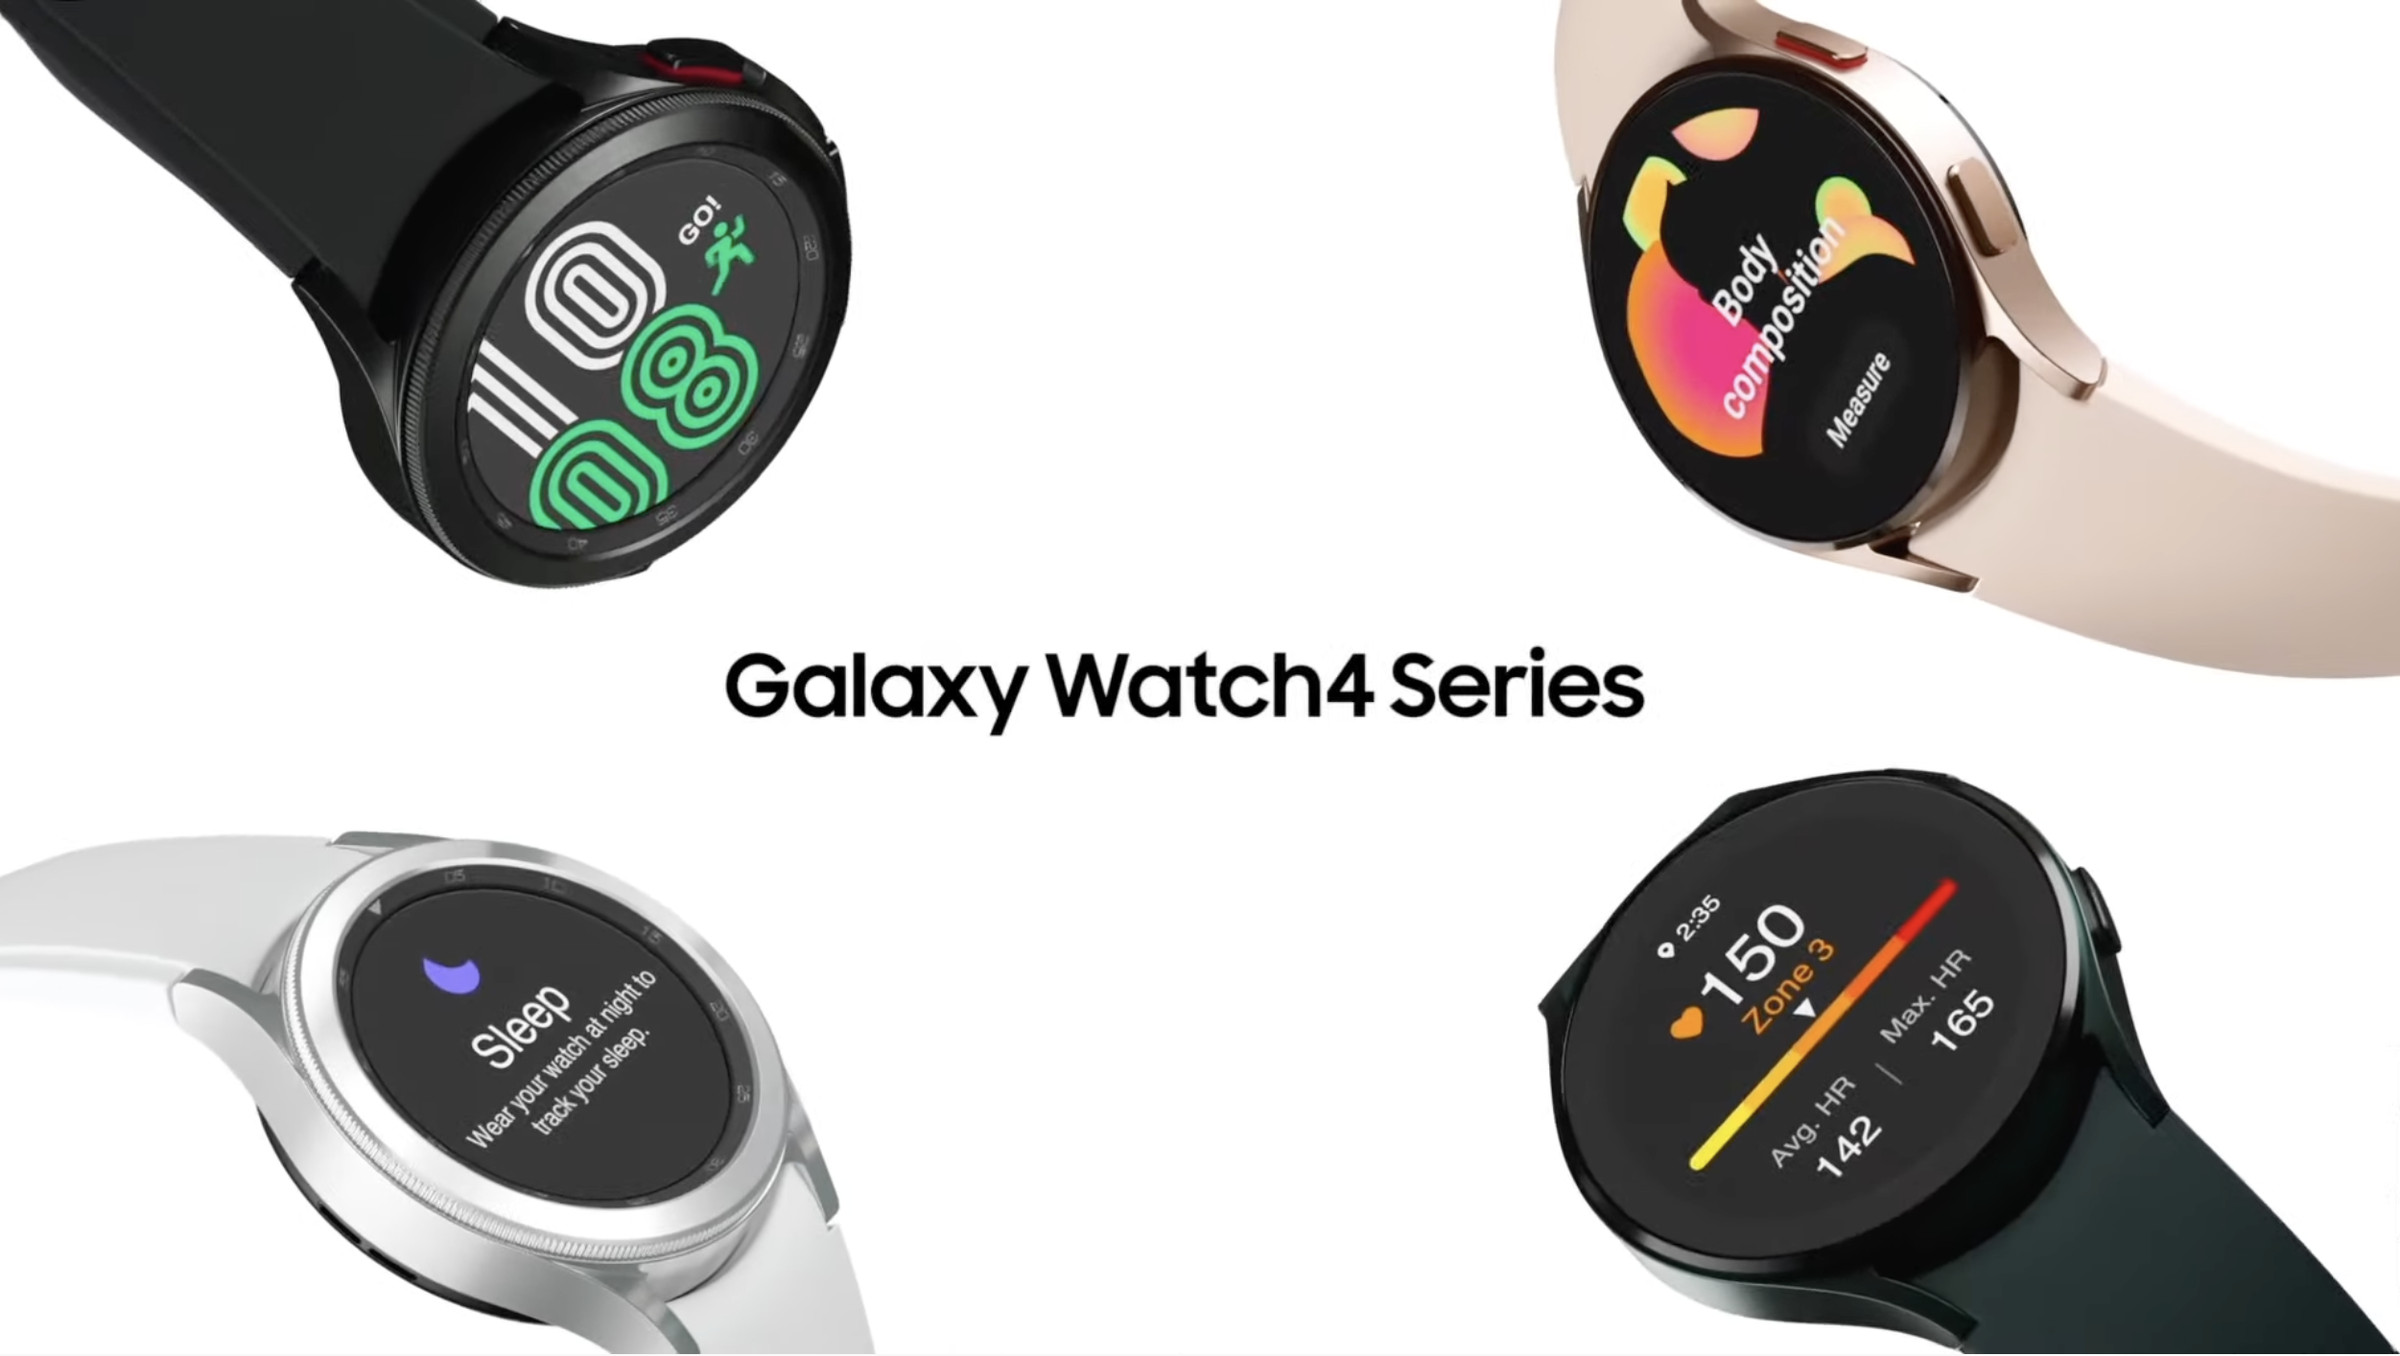 Samsung’s presentation focused heavily on the Watch’s health tracking.